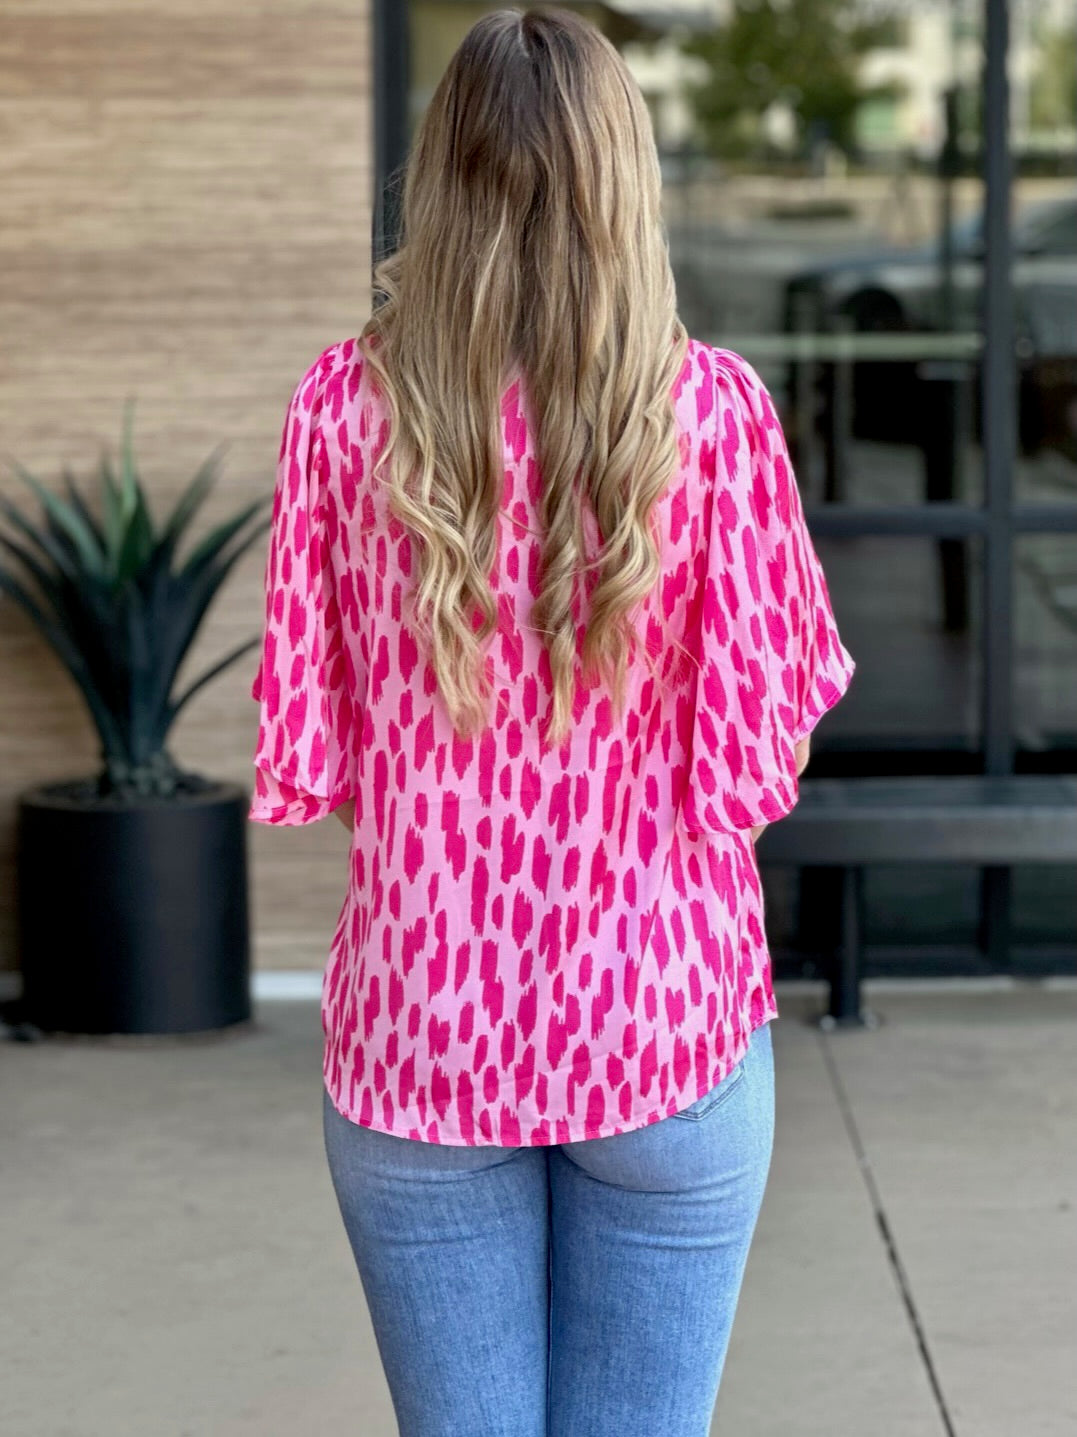 Lexi in hot pink blouse back view